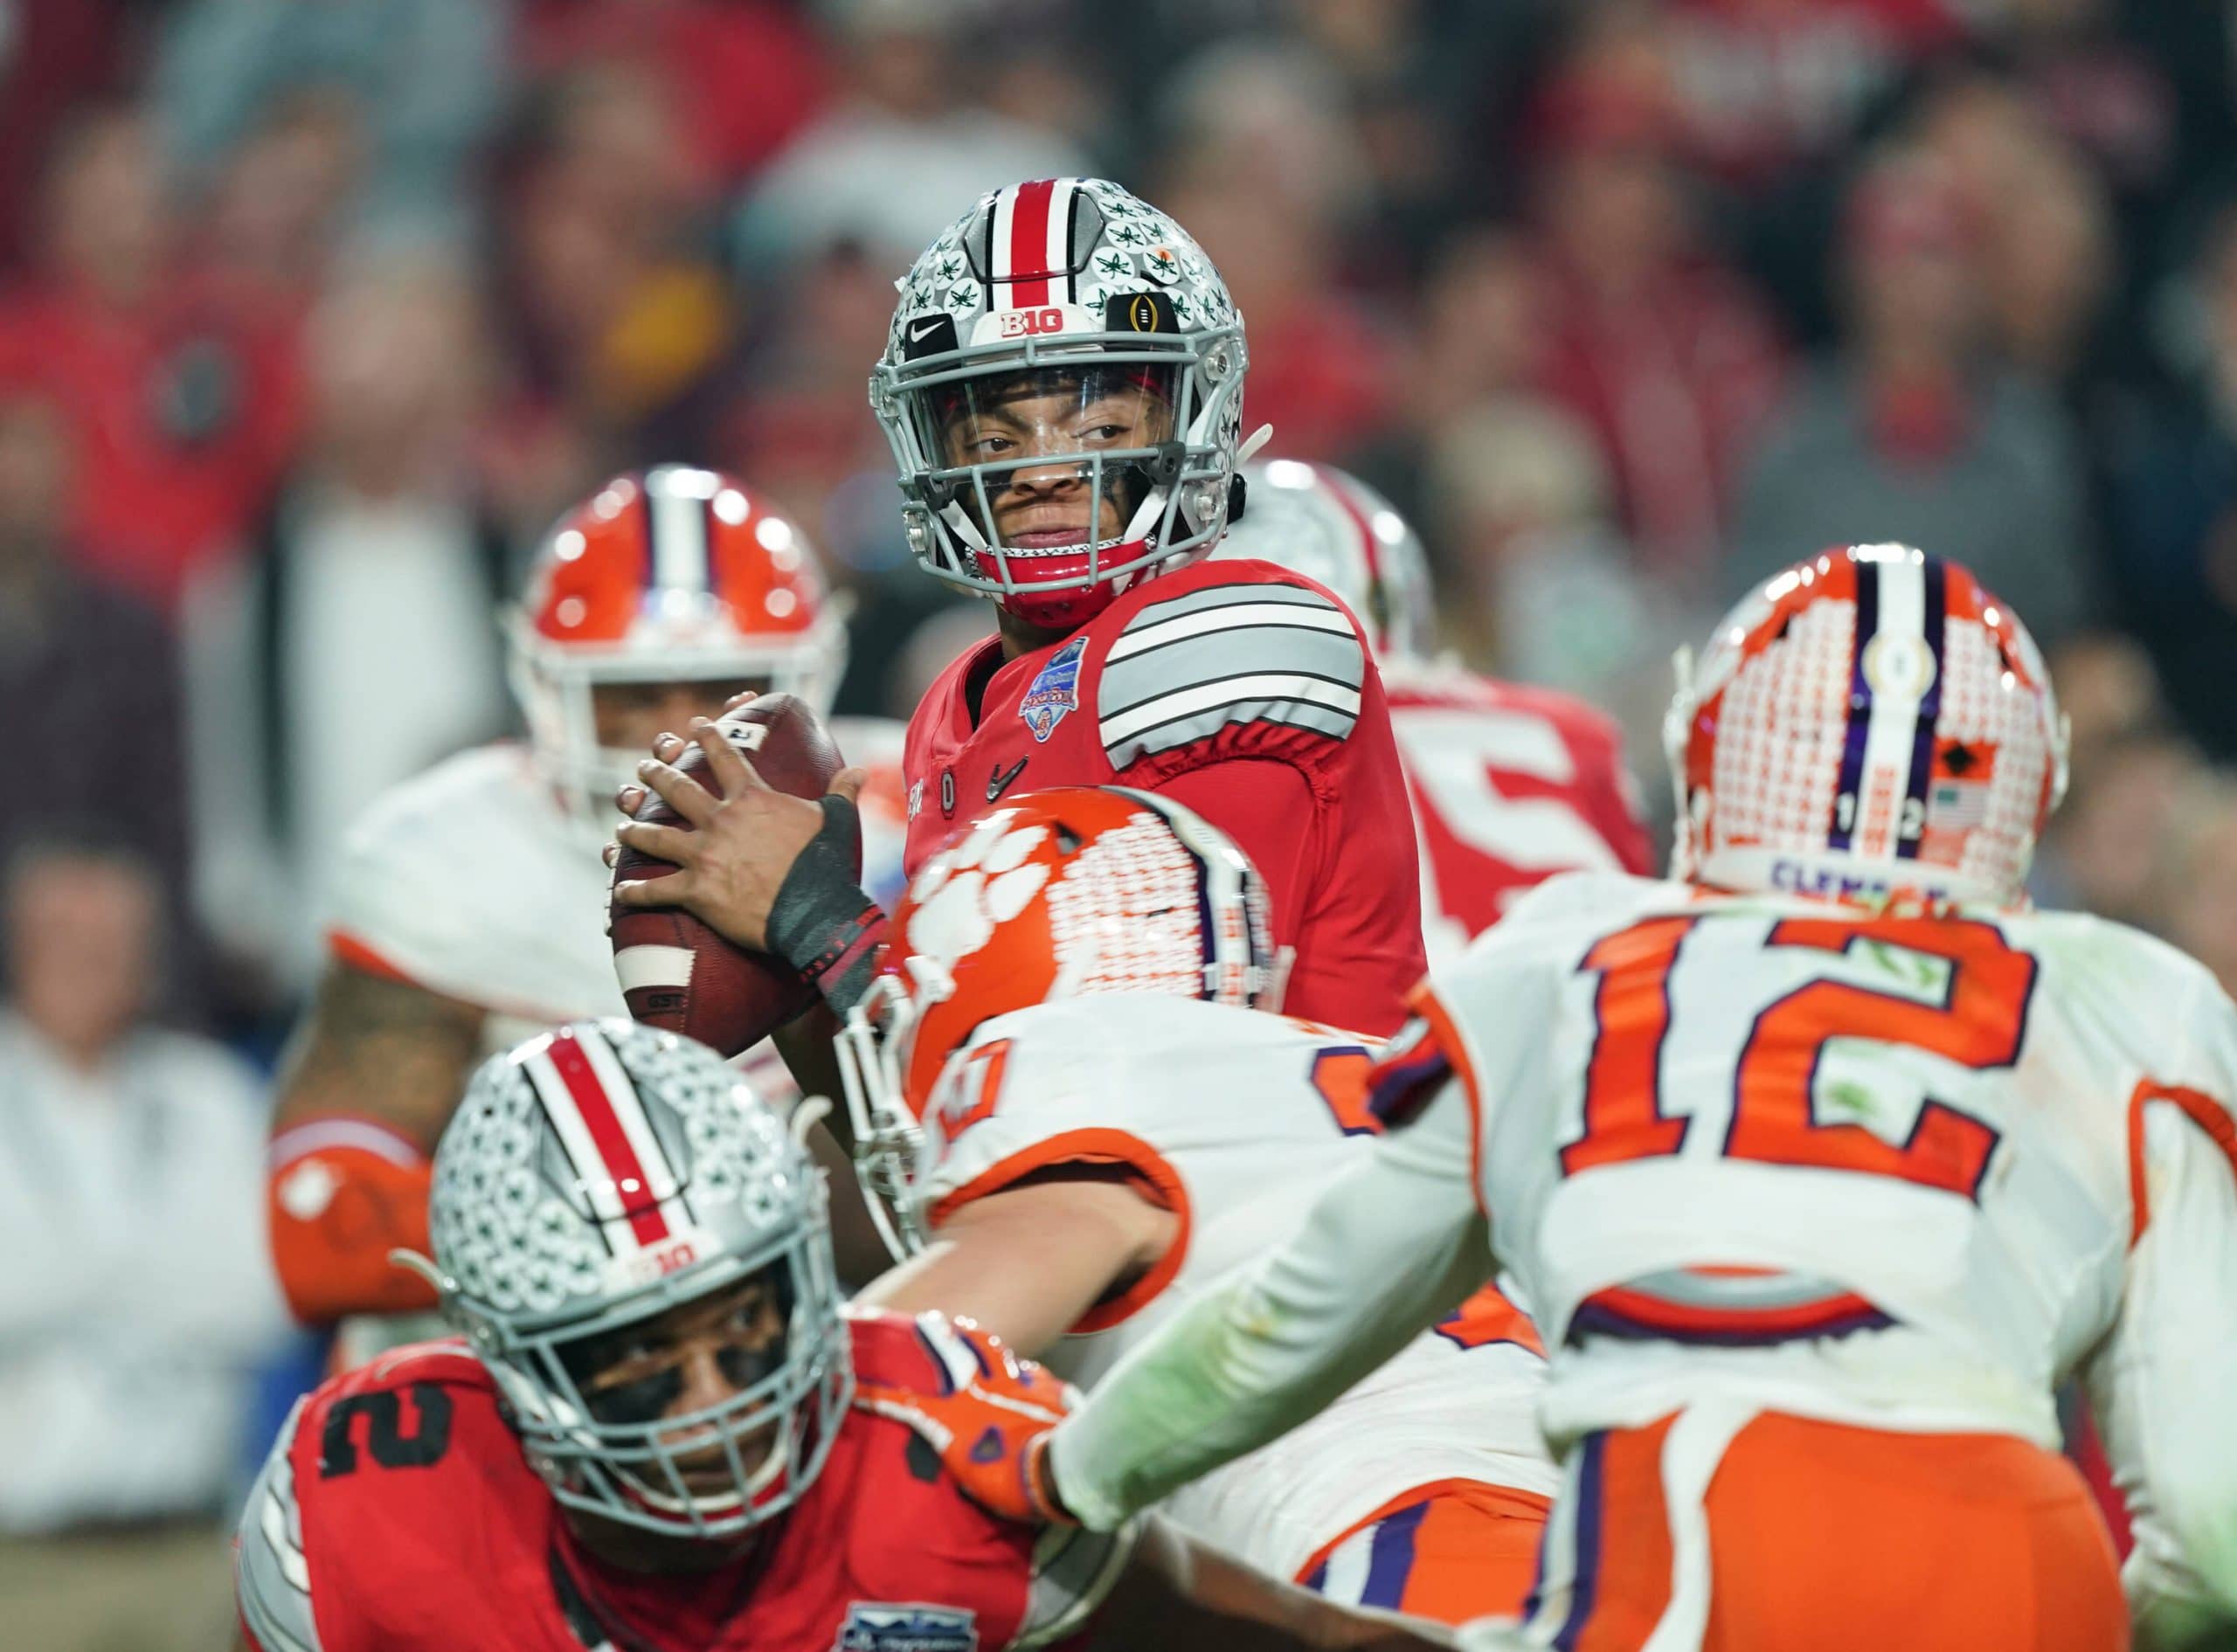 former Ohio State Buckeyes quarterback (1) Justin Fields is projected to go in the 1st Round of the NFL,